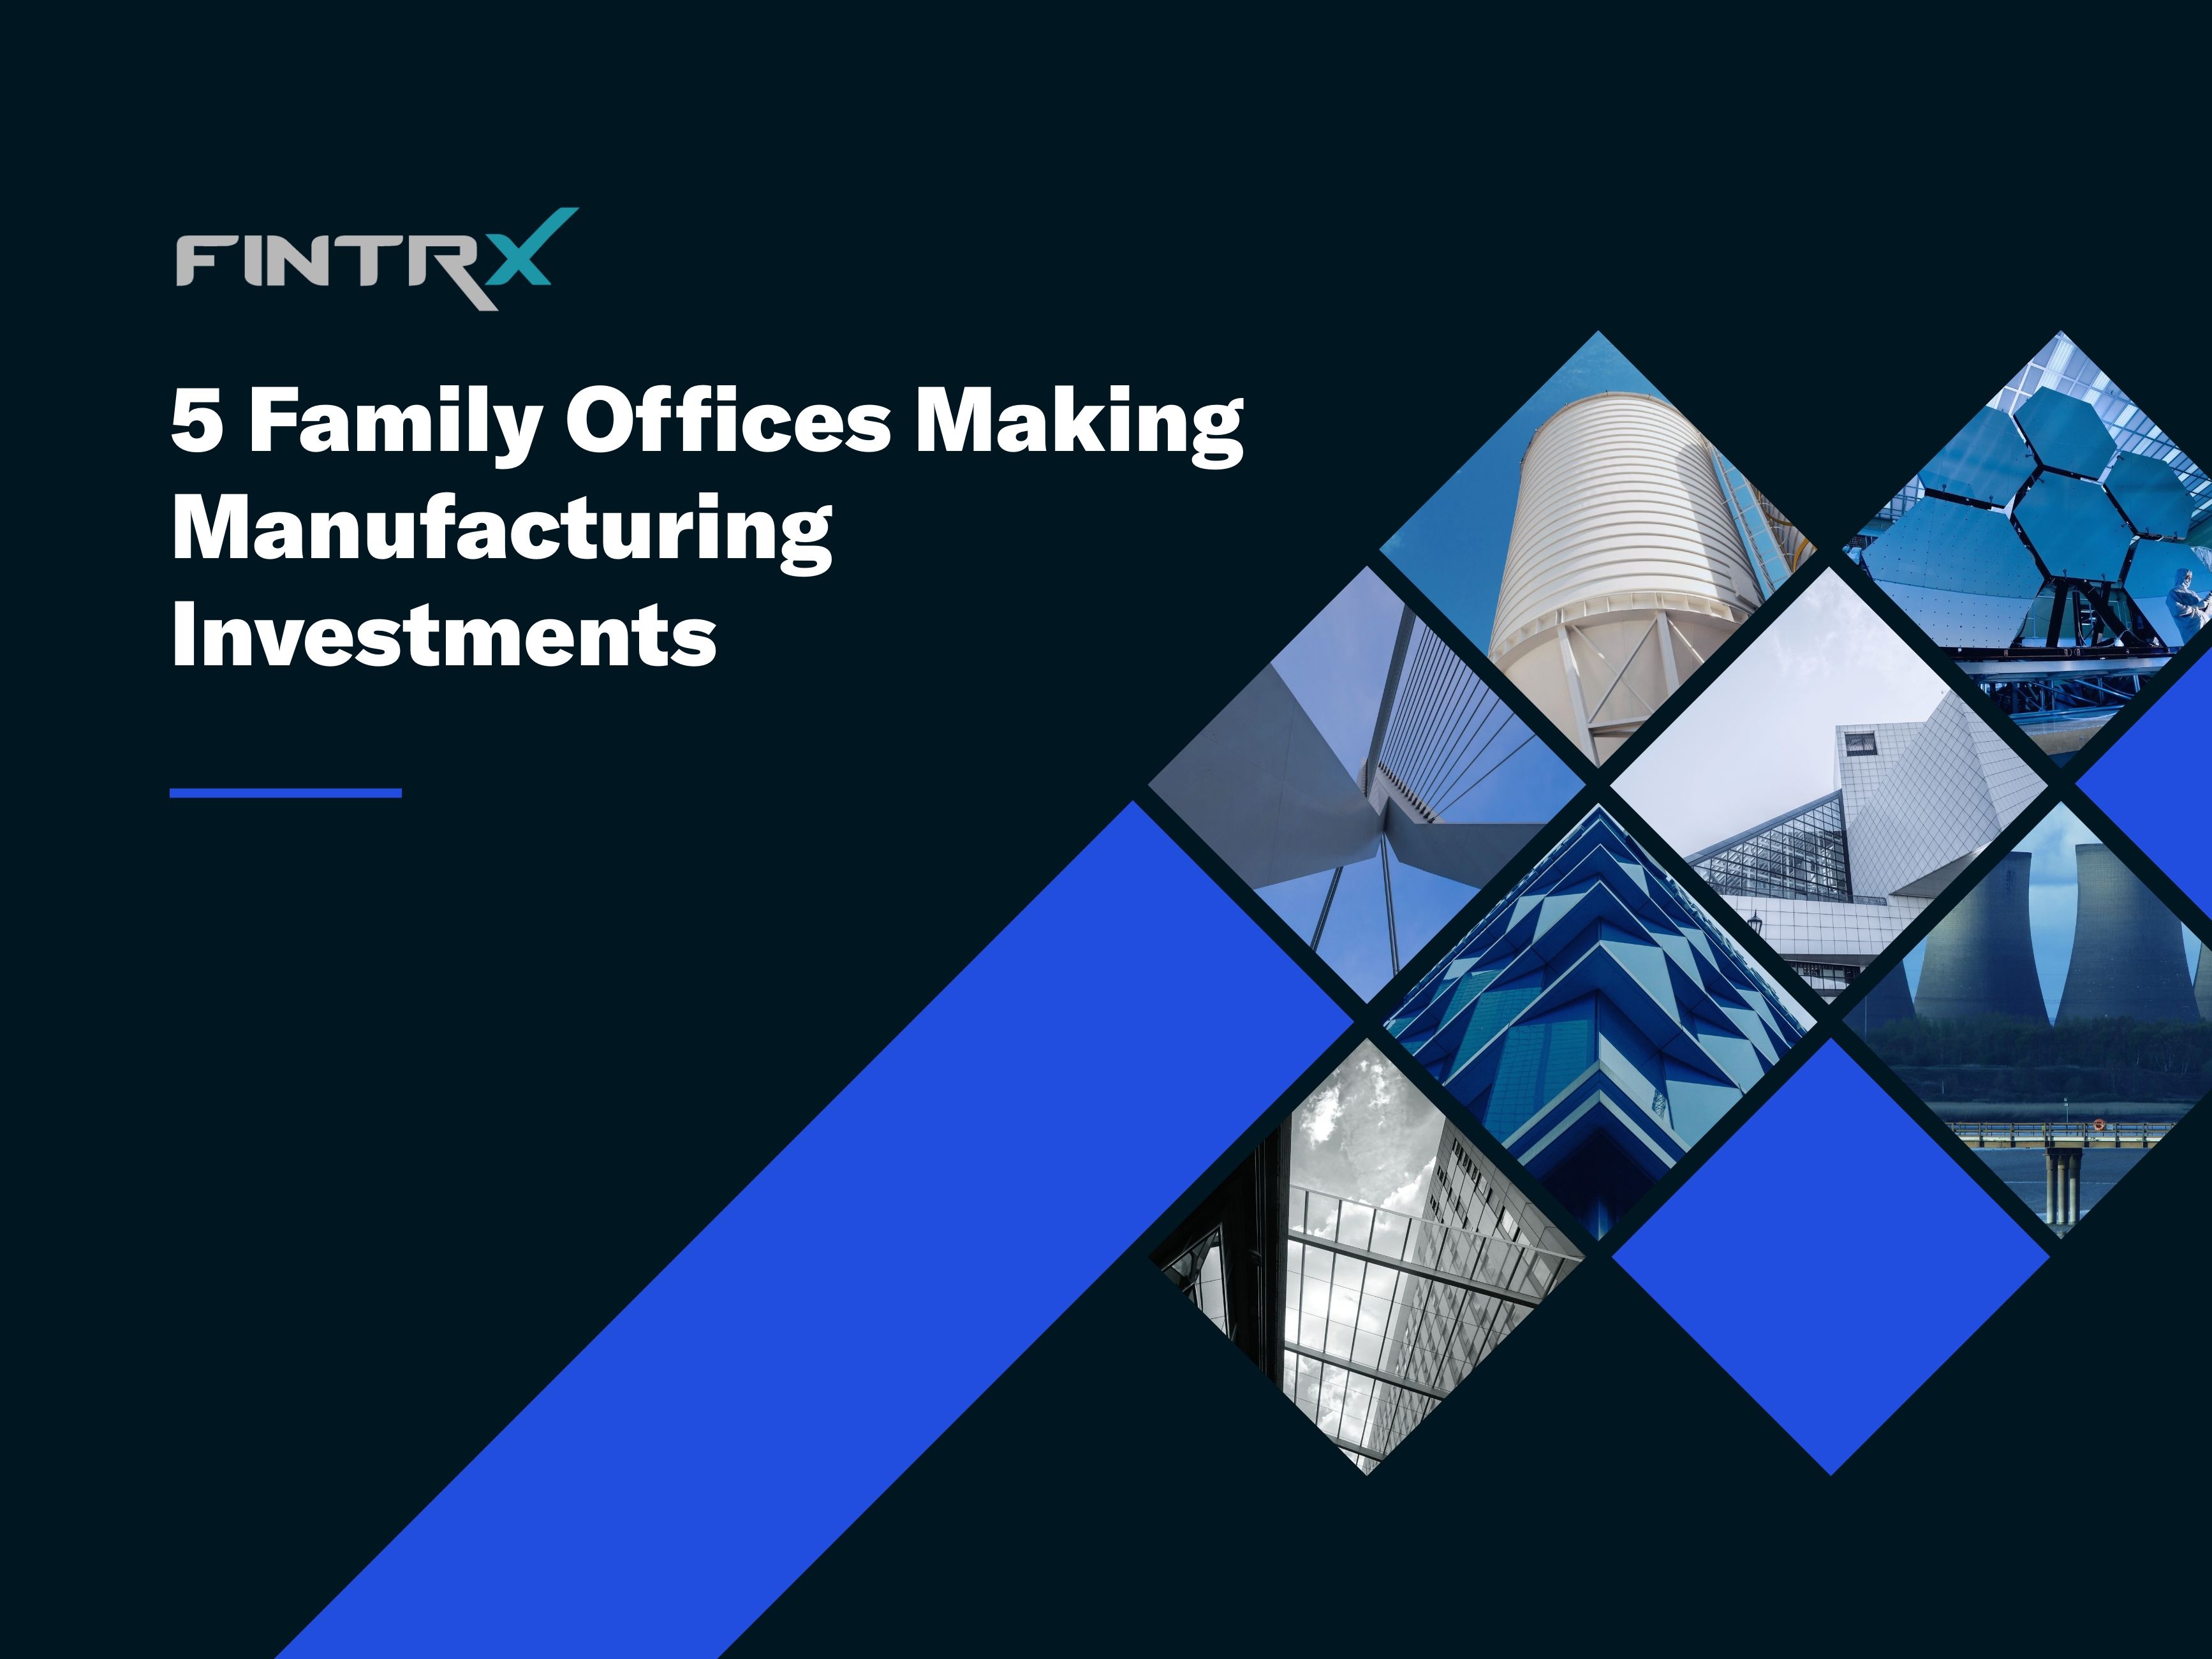 5 Family Offices Making Manufacturing Investments